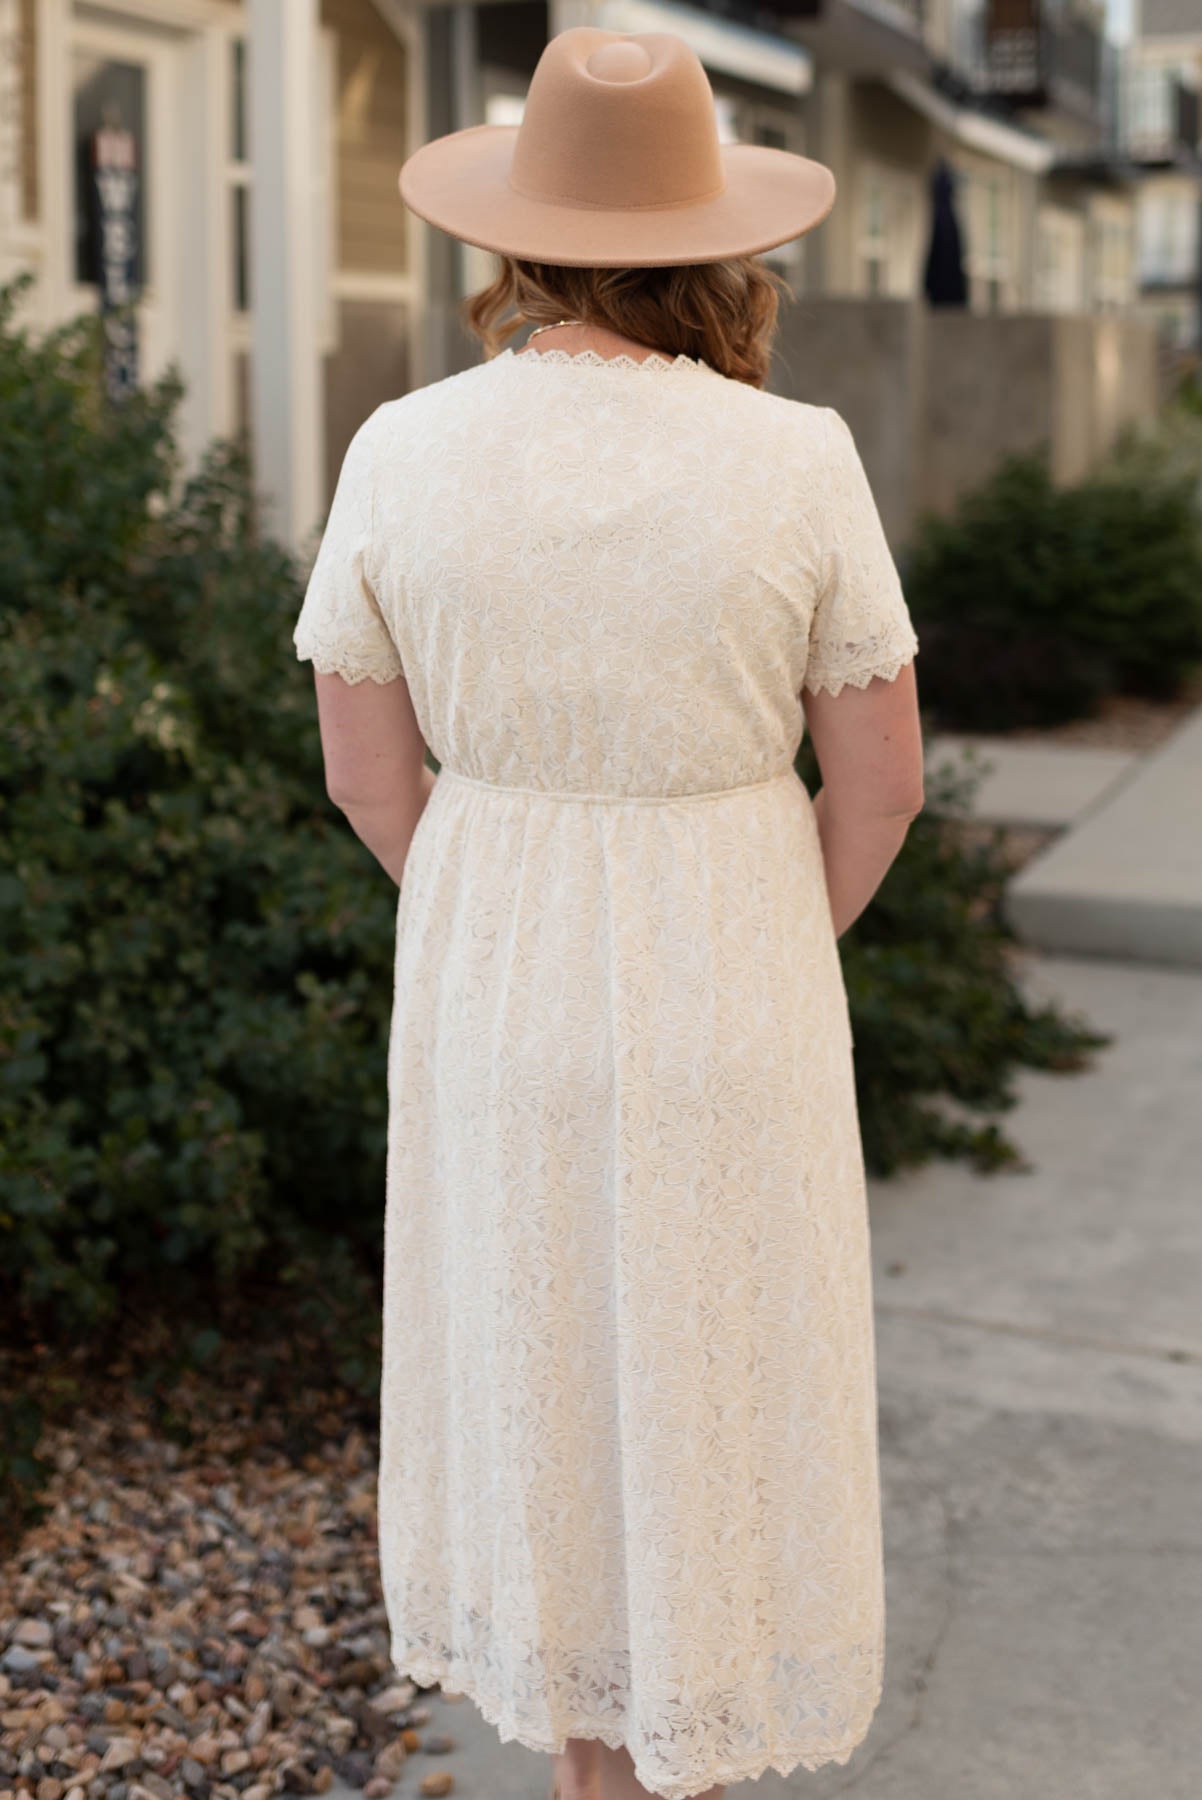 Back view of a cream lace dress